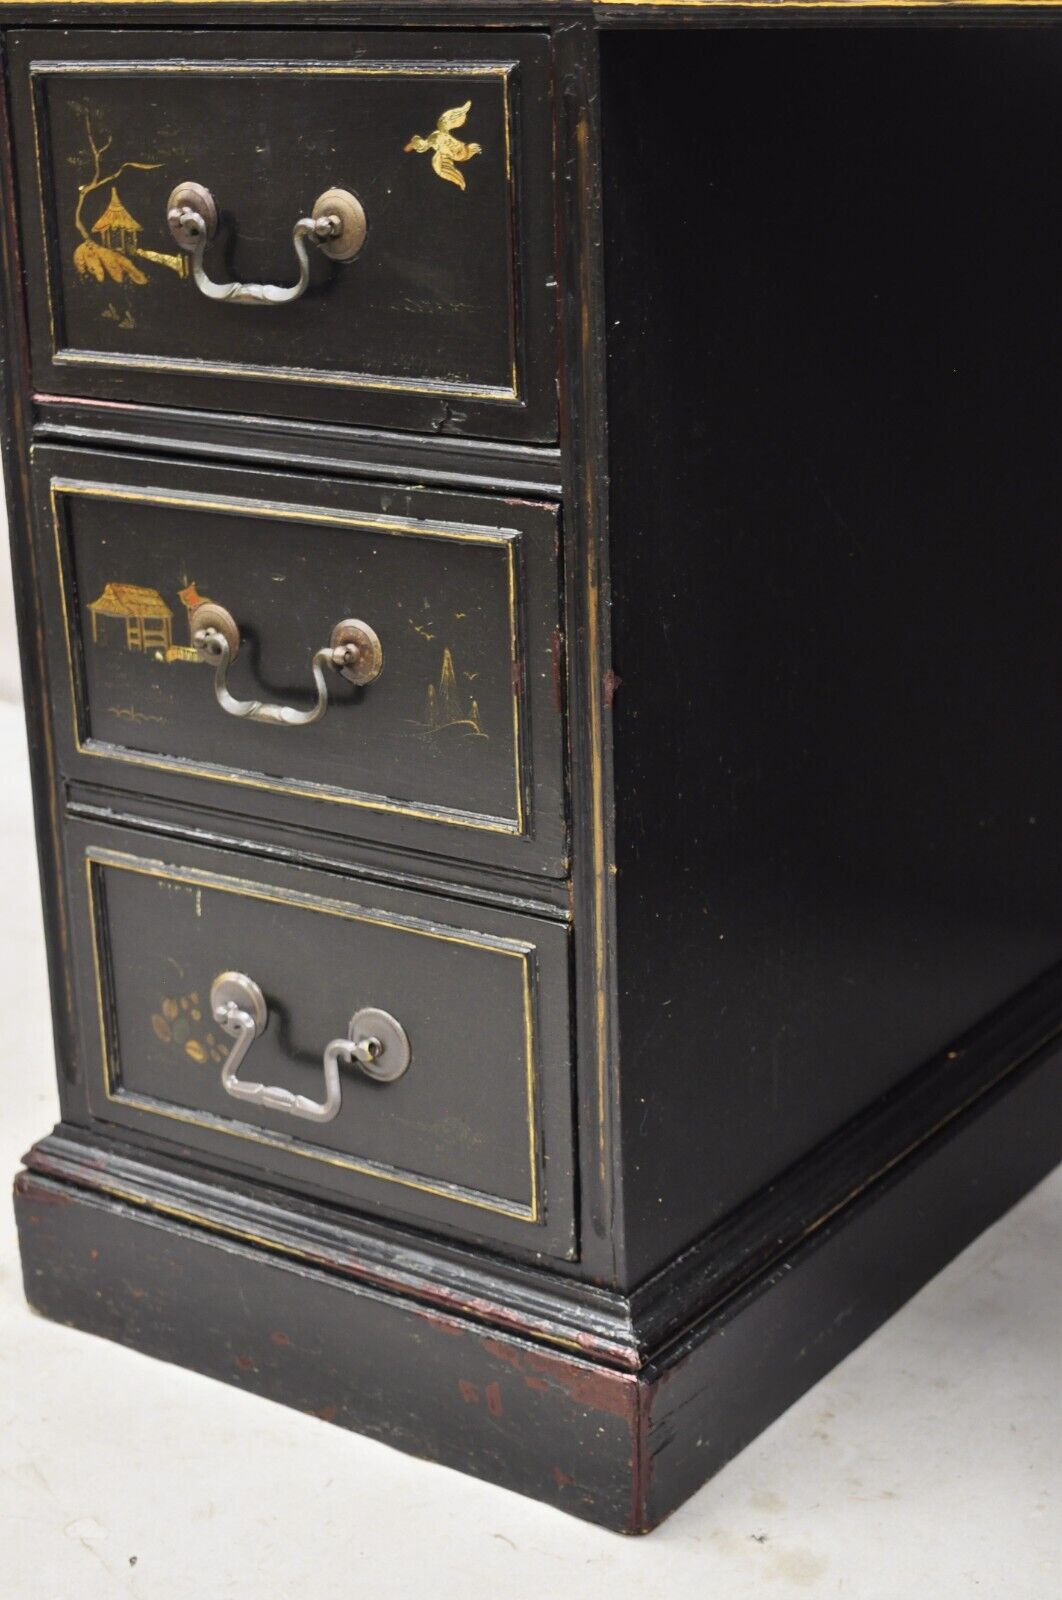 Vintage Chinoiserie Black Chinese Painted Red Leather Top Kneehole Writing Desk